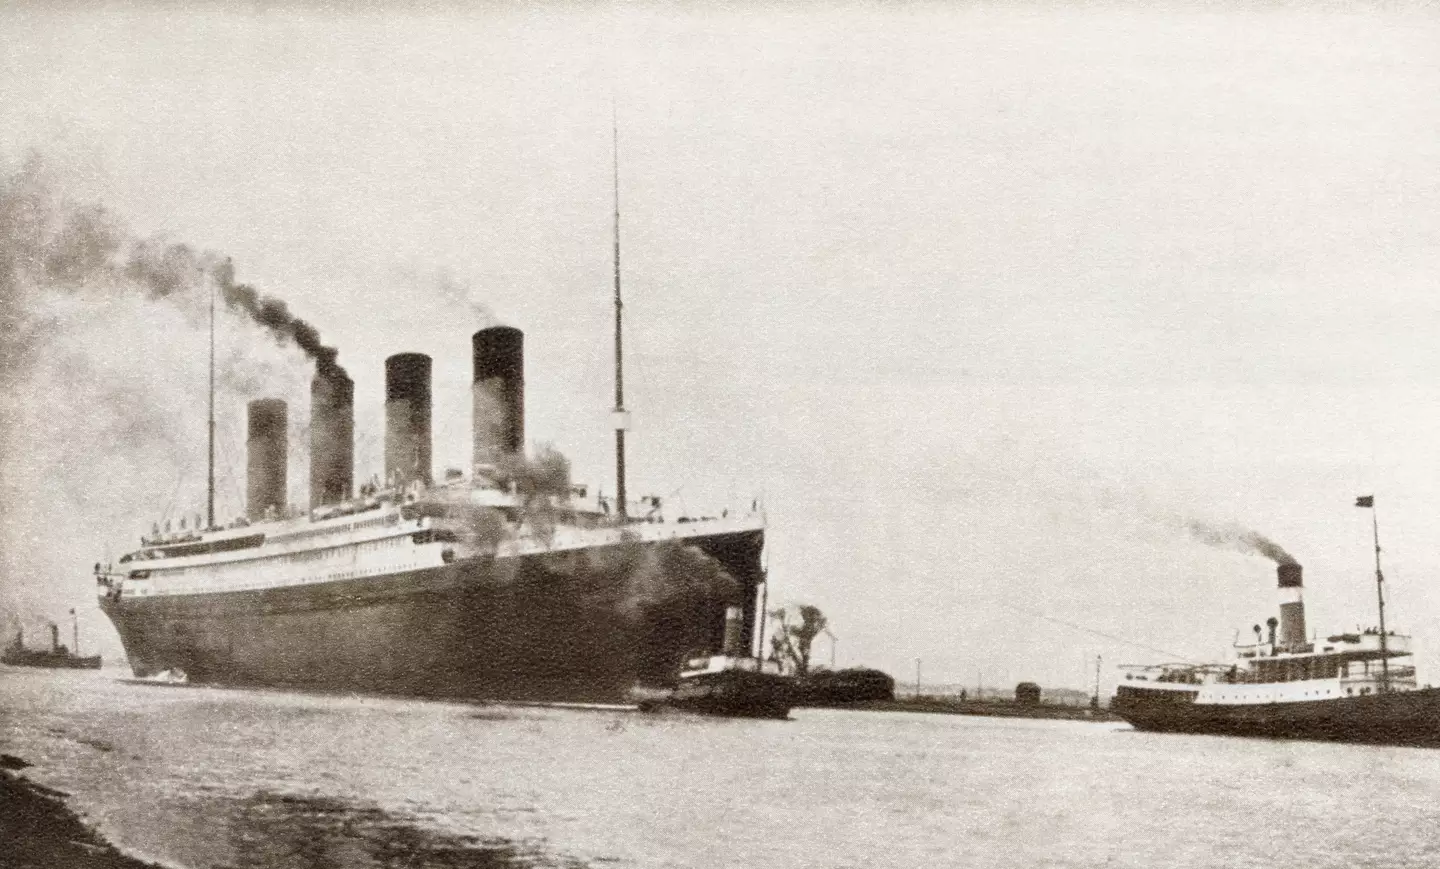 The Titanic split in two as it sank to the bottom of the ocean.